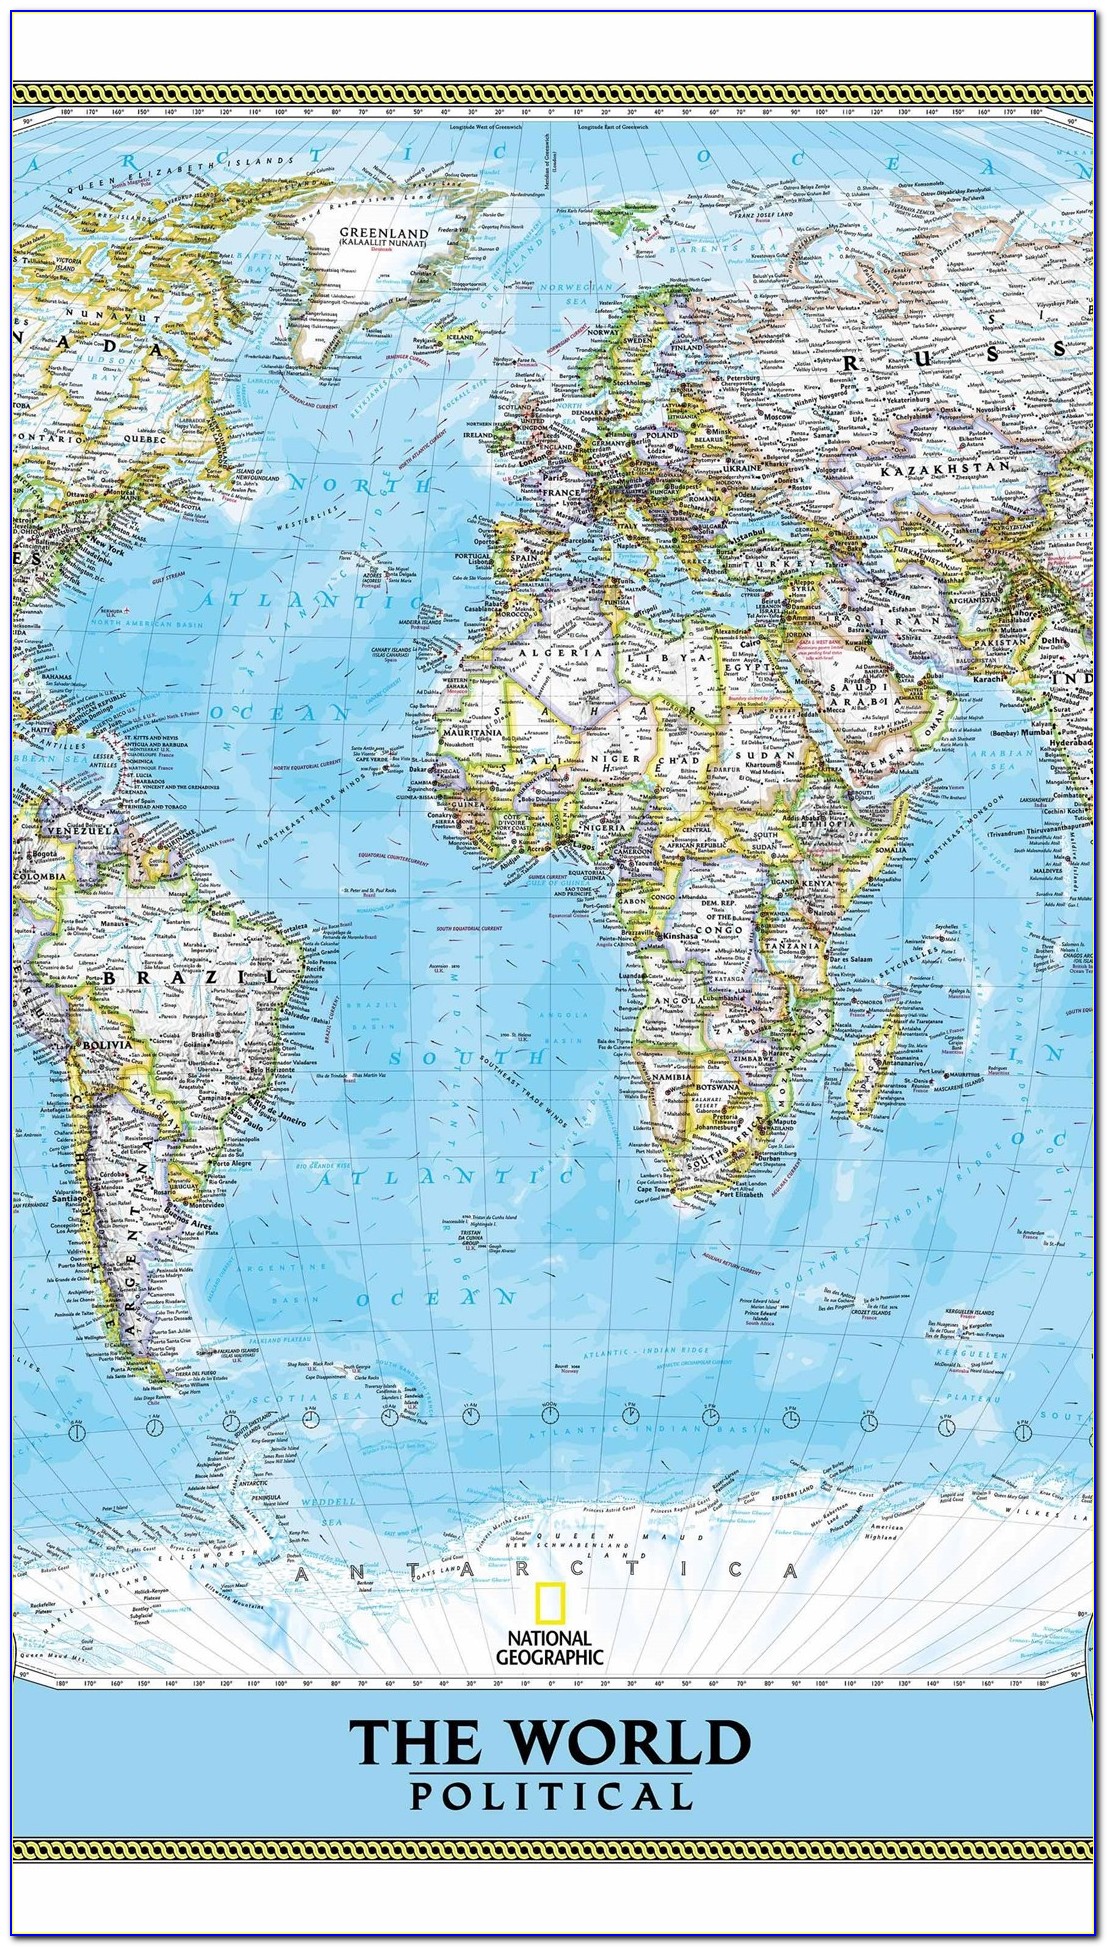 National Geographic World Executive Mural Map